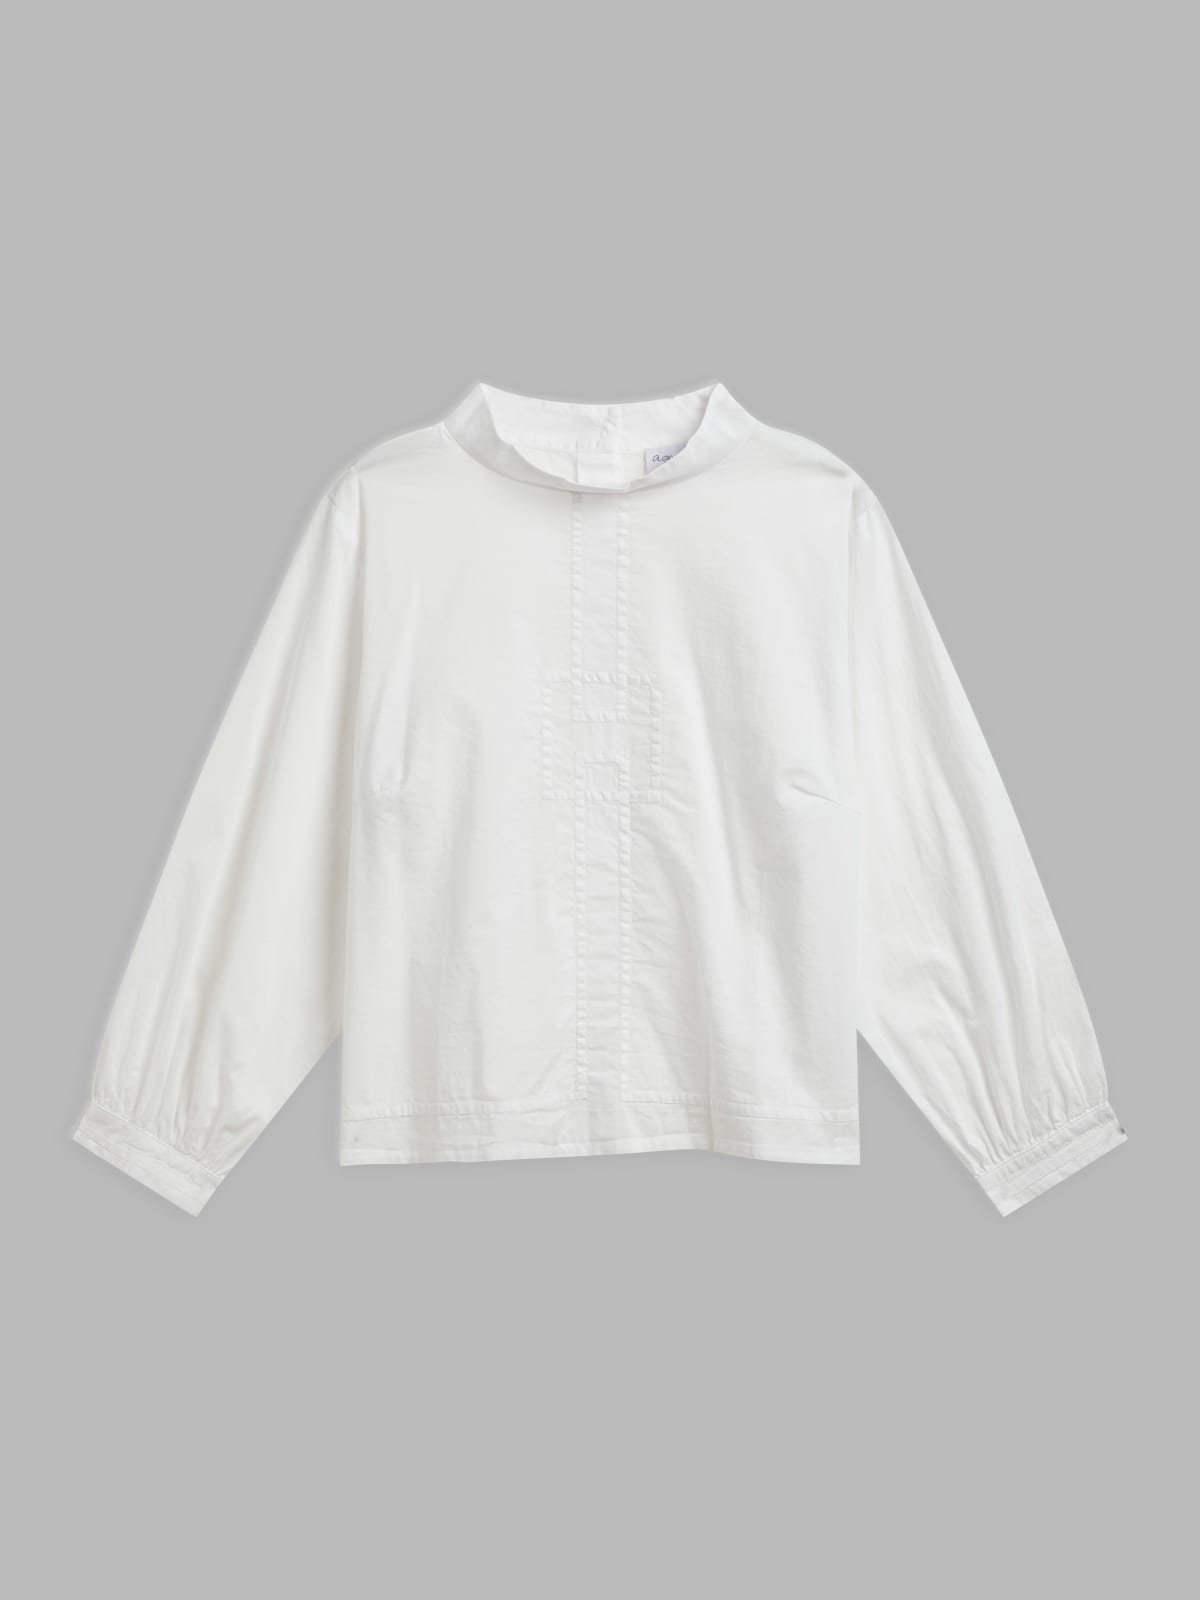 white cotton long-sleeve top